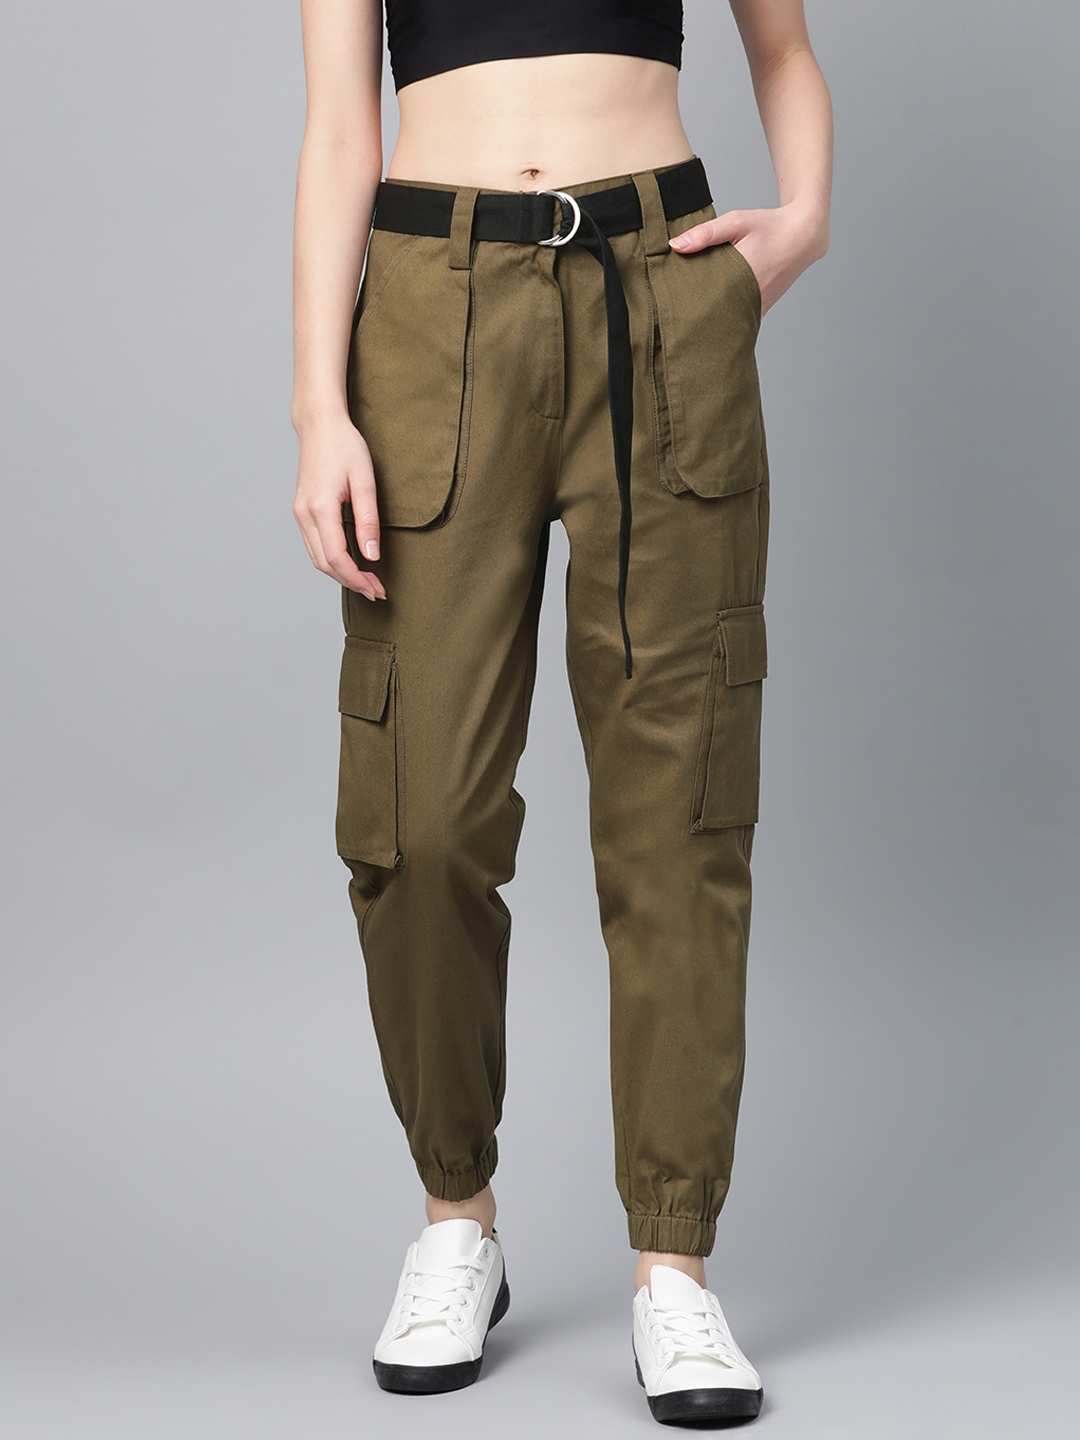 Wilfred Free NEW HIGHWAY CARGO PANT  Aritzia US